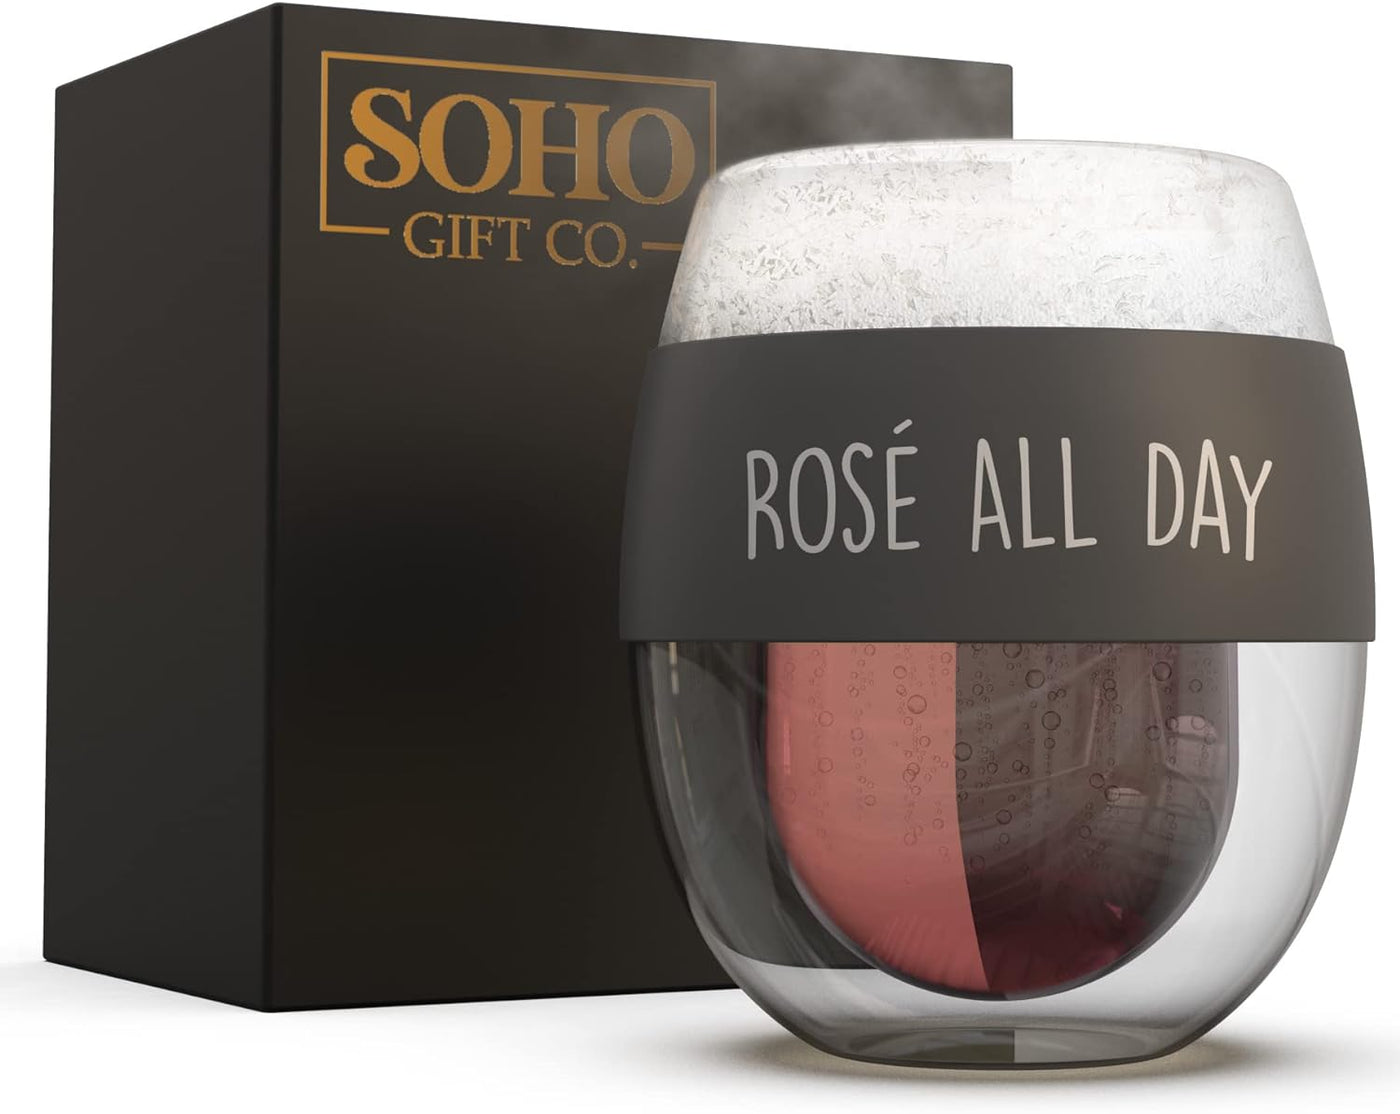 Freezer Chilled Stemless Wine Glass, Double Walled Insulated Frozen Chiller Cup (8.5oz) Fun Wine Lover Gift for Women/Her Rose All Day (Gift Boxed)